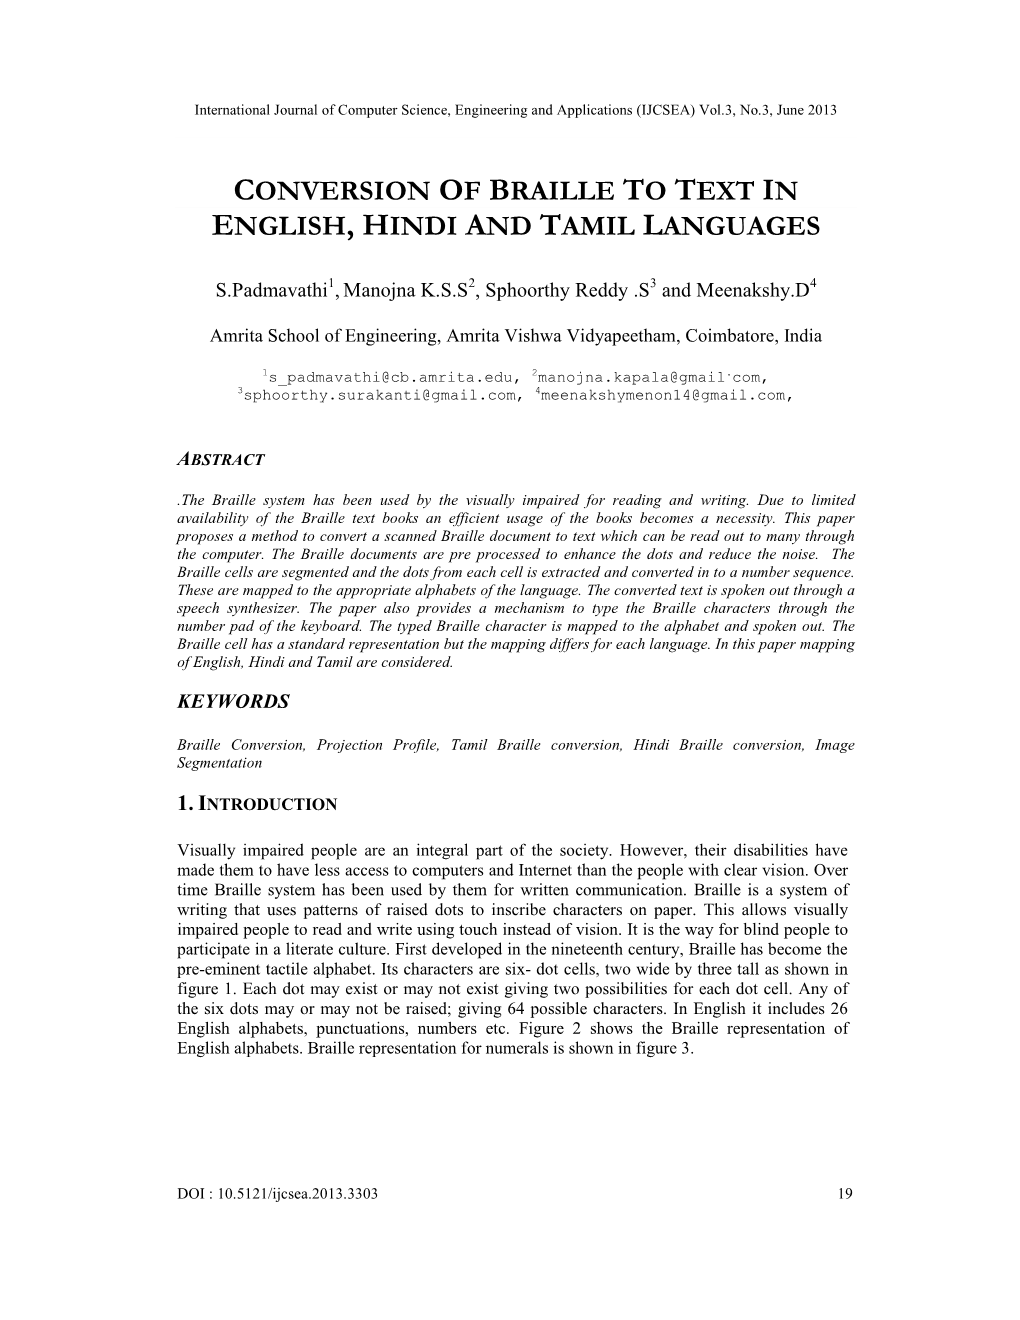 Conversion of Braille to Text in English, Hindi and Tamil Languages